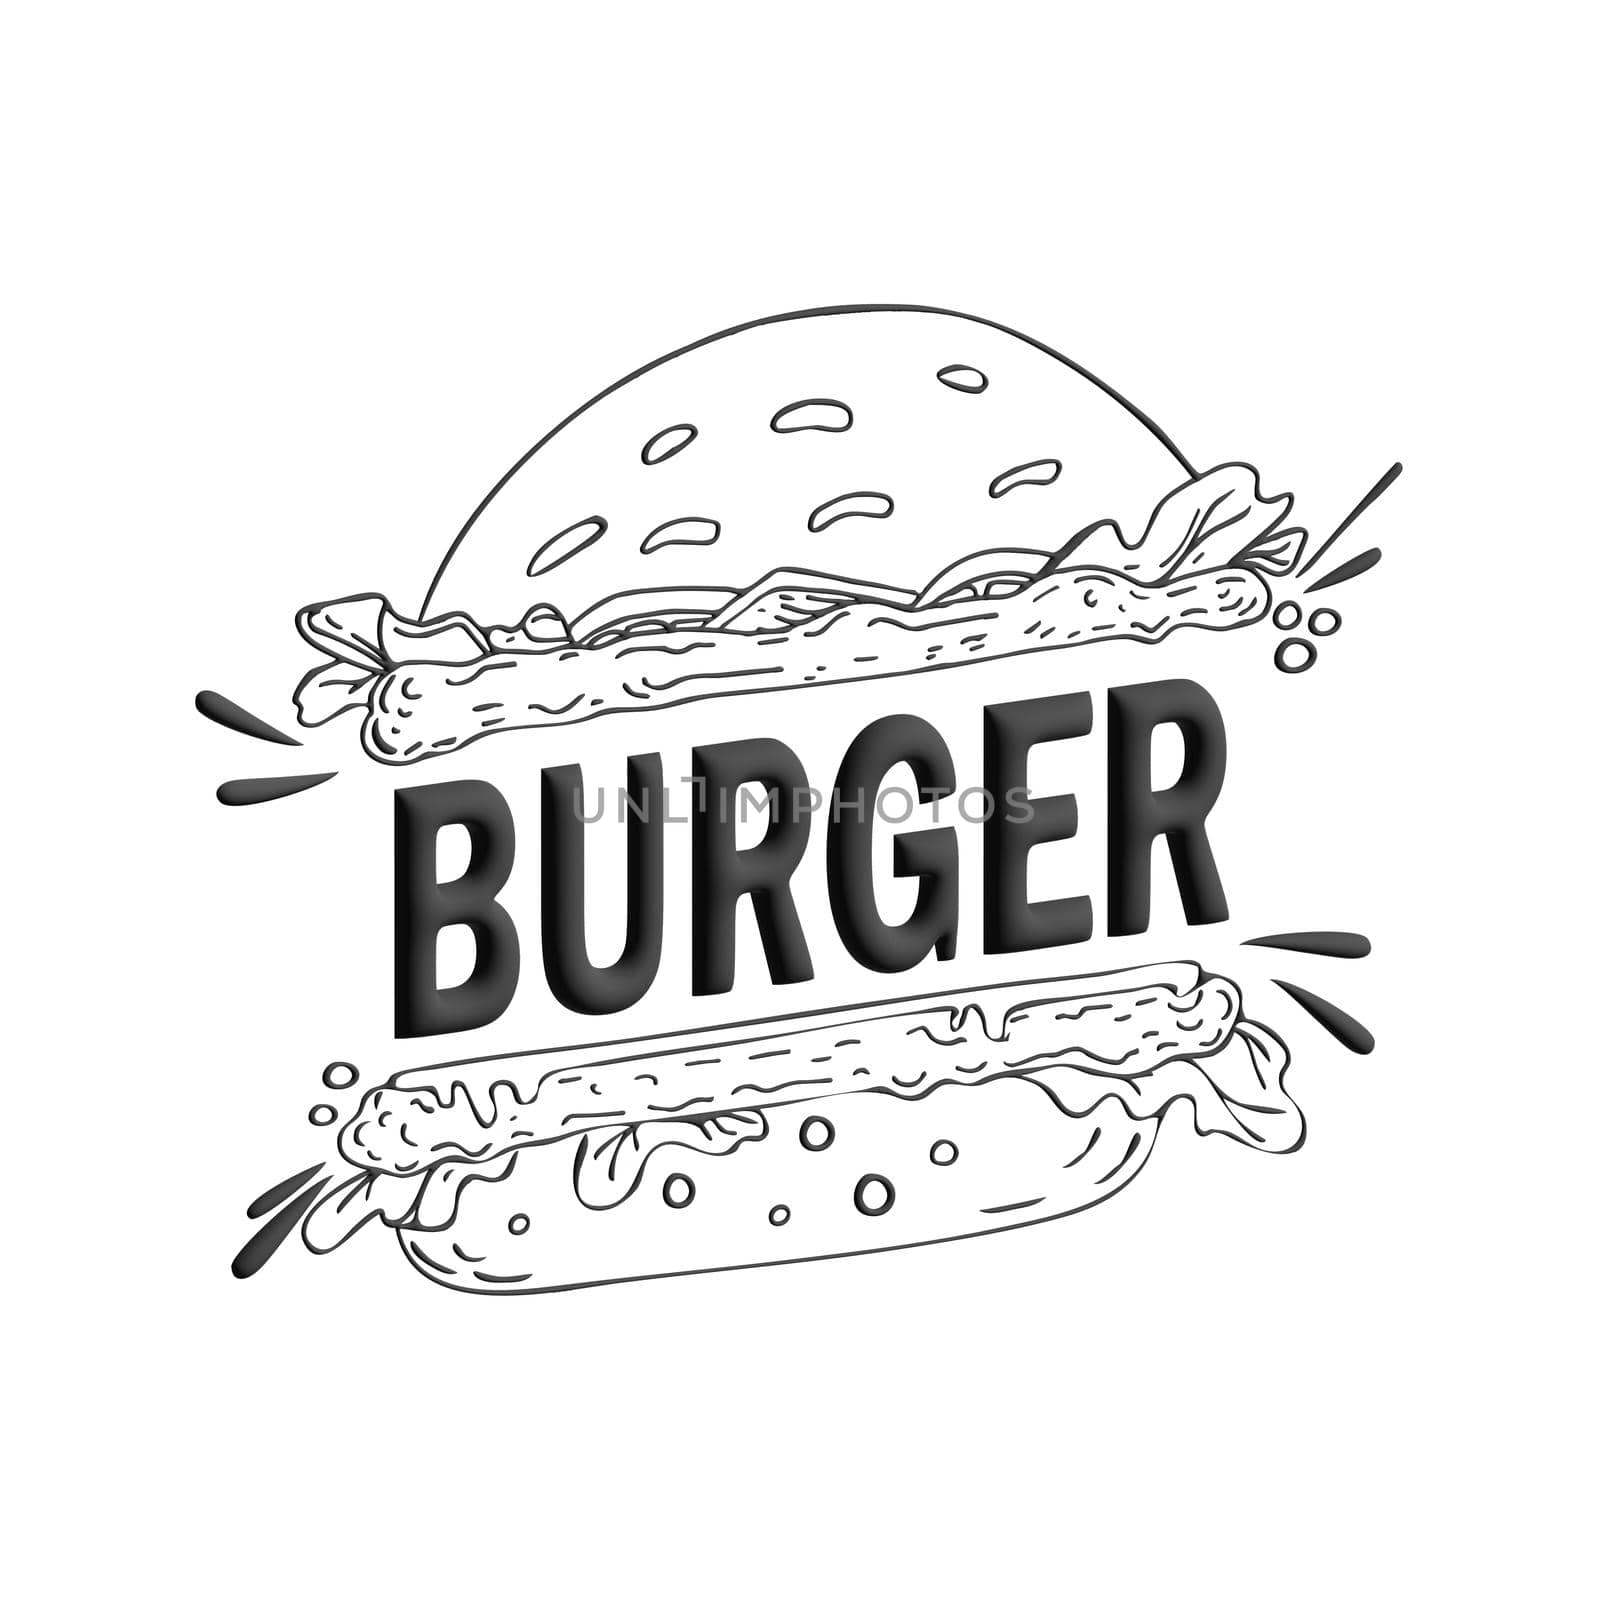 Text BURGER stylized as a hamburger. Stylish design for a brand, label or advertisement - 3D image by BEMPhoto